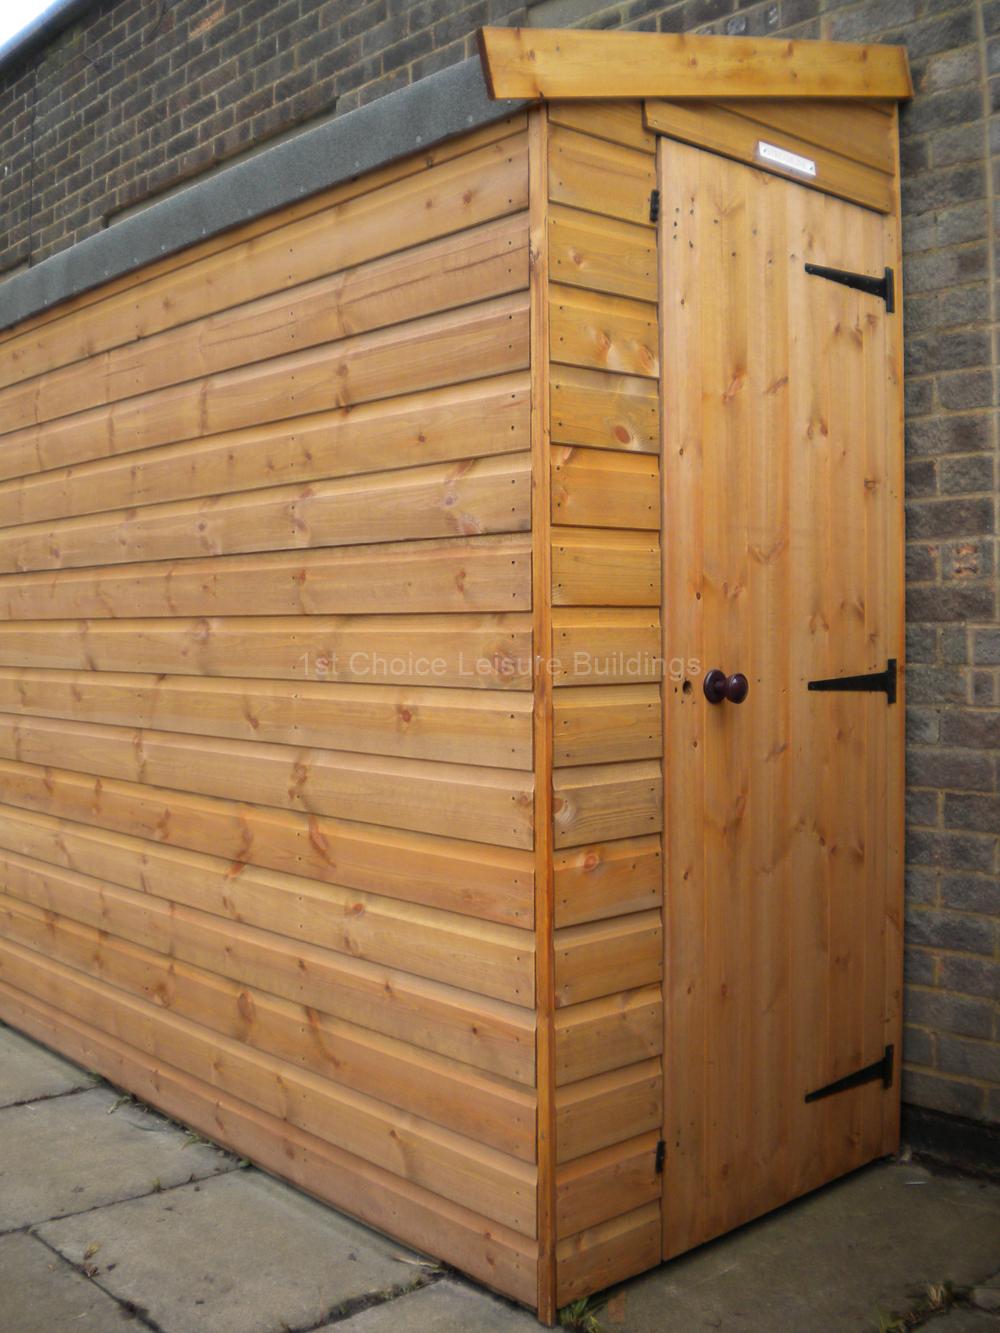 1st Choice Diamond Shoreham Narrow Wooden Shed With Free Installation 3